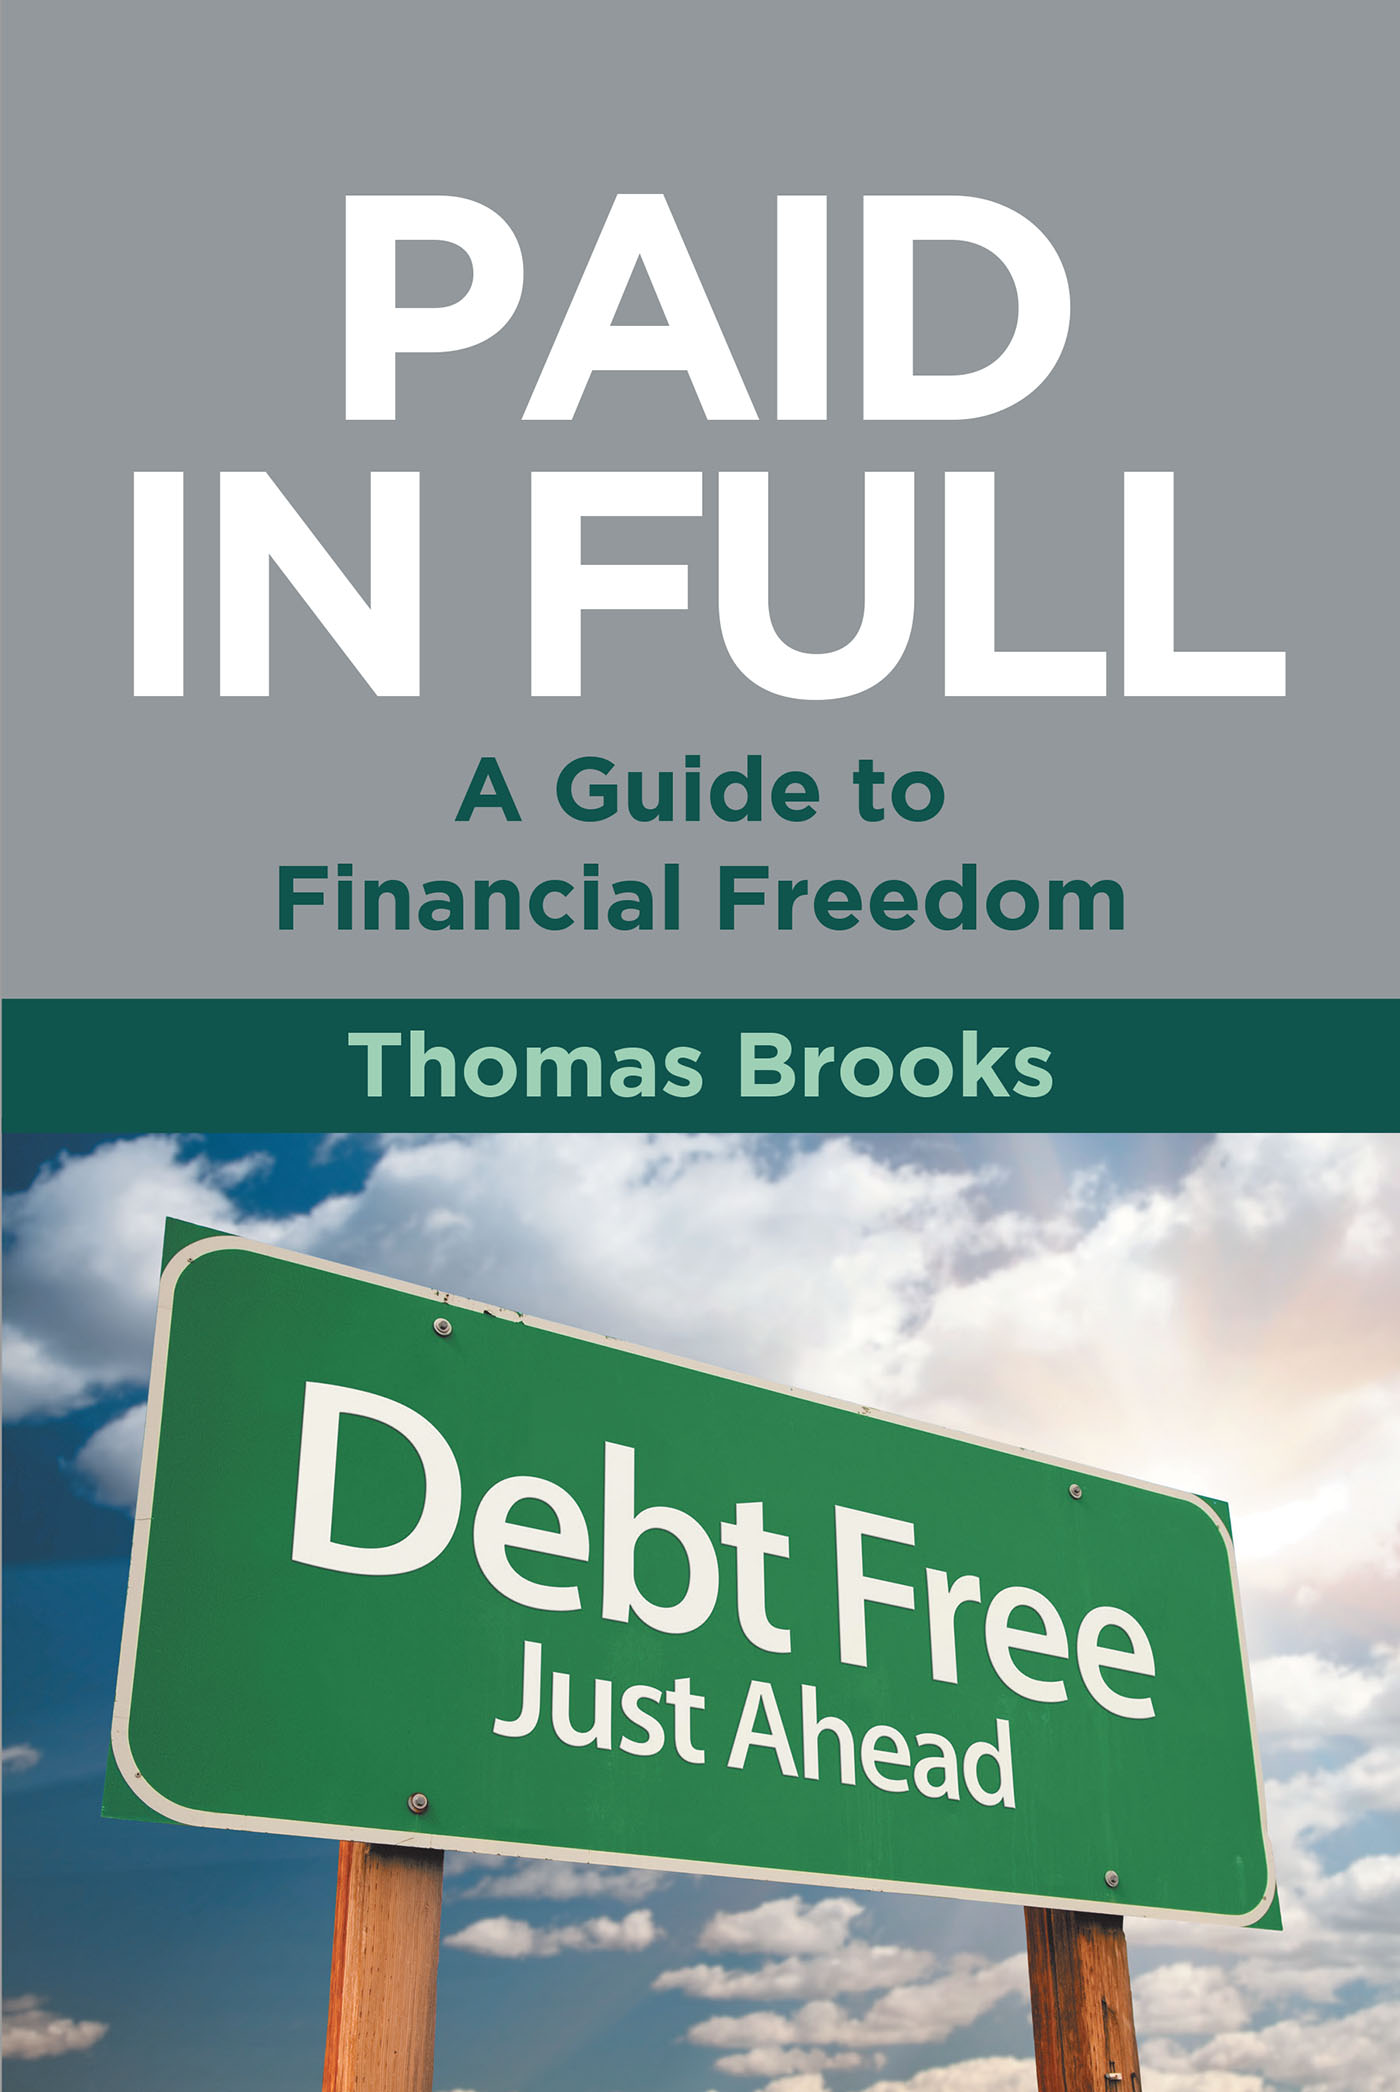 Author Thomas Brooks’s New Book, “Paid in Full—A Guide to Financial Freedom,” is a Useful Resource for Those Seeking Better Financial Management